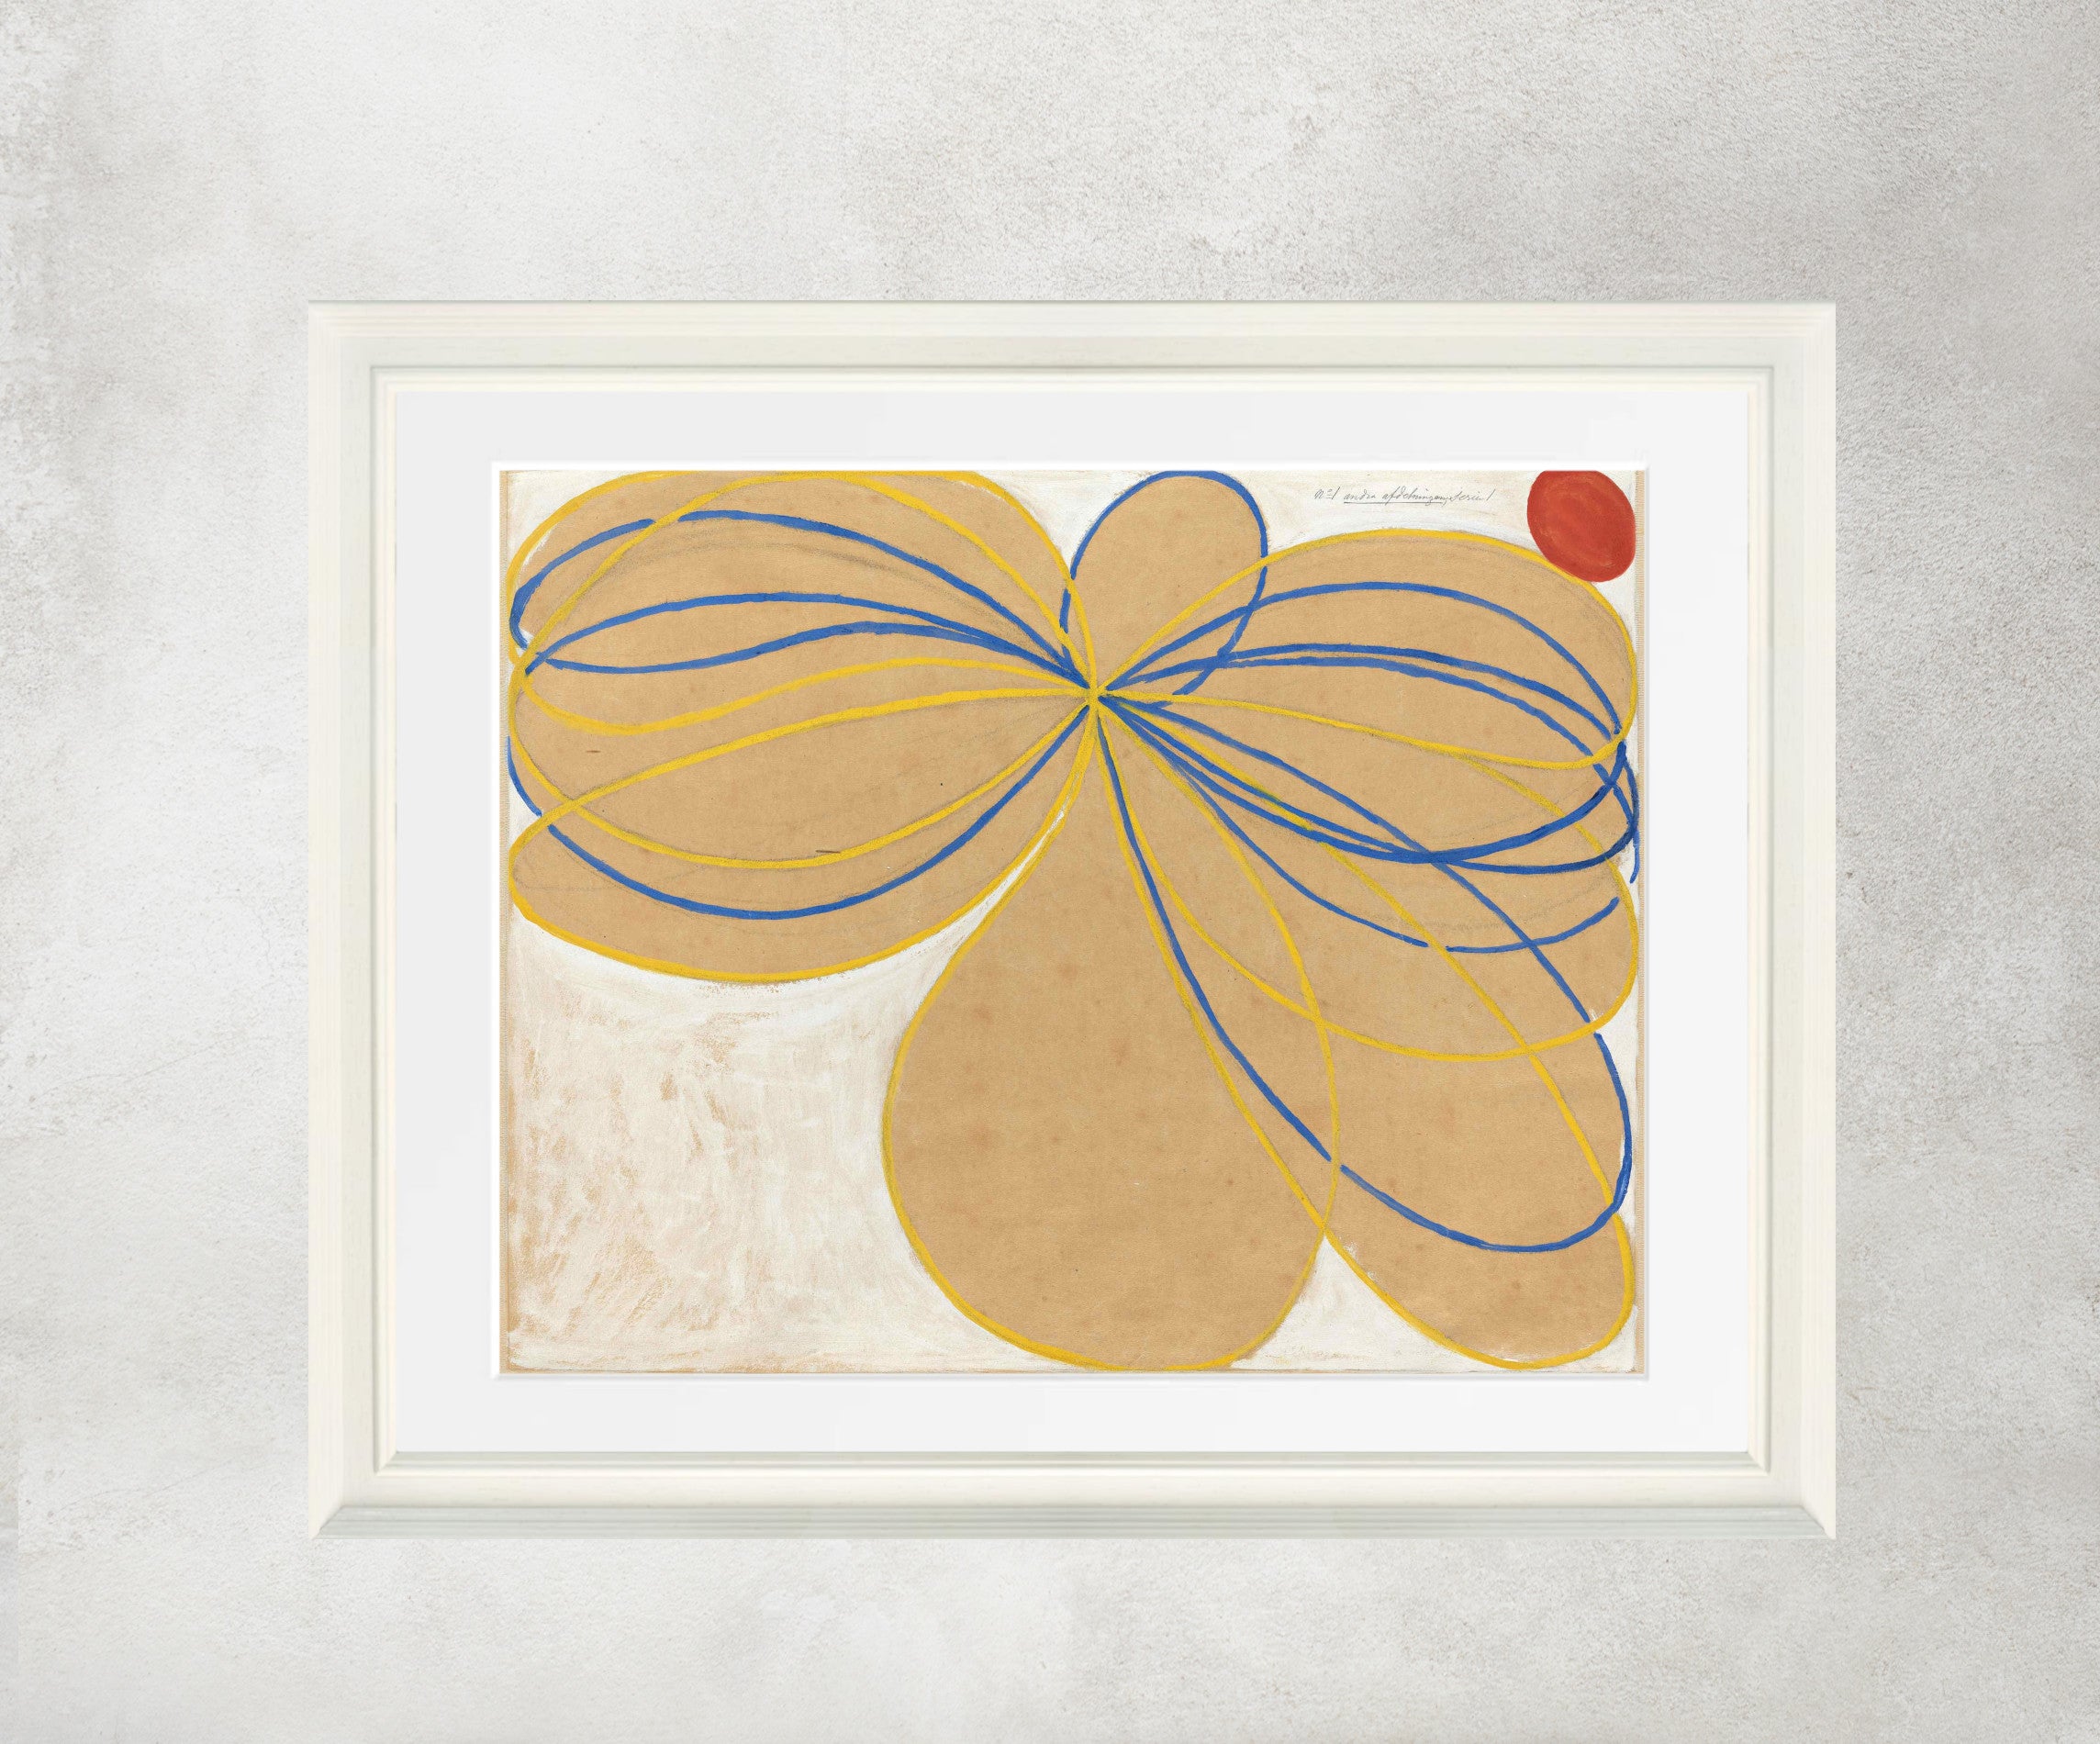 Hilma Af Klint Abstract Framed Art Print, The Seven-Pointed Star No. 1